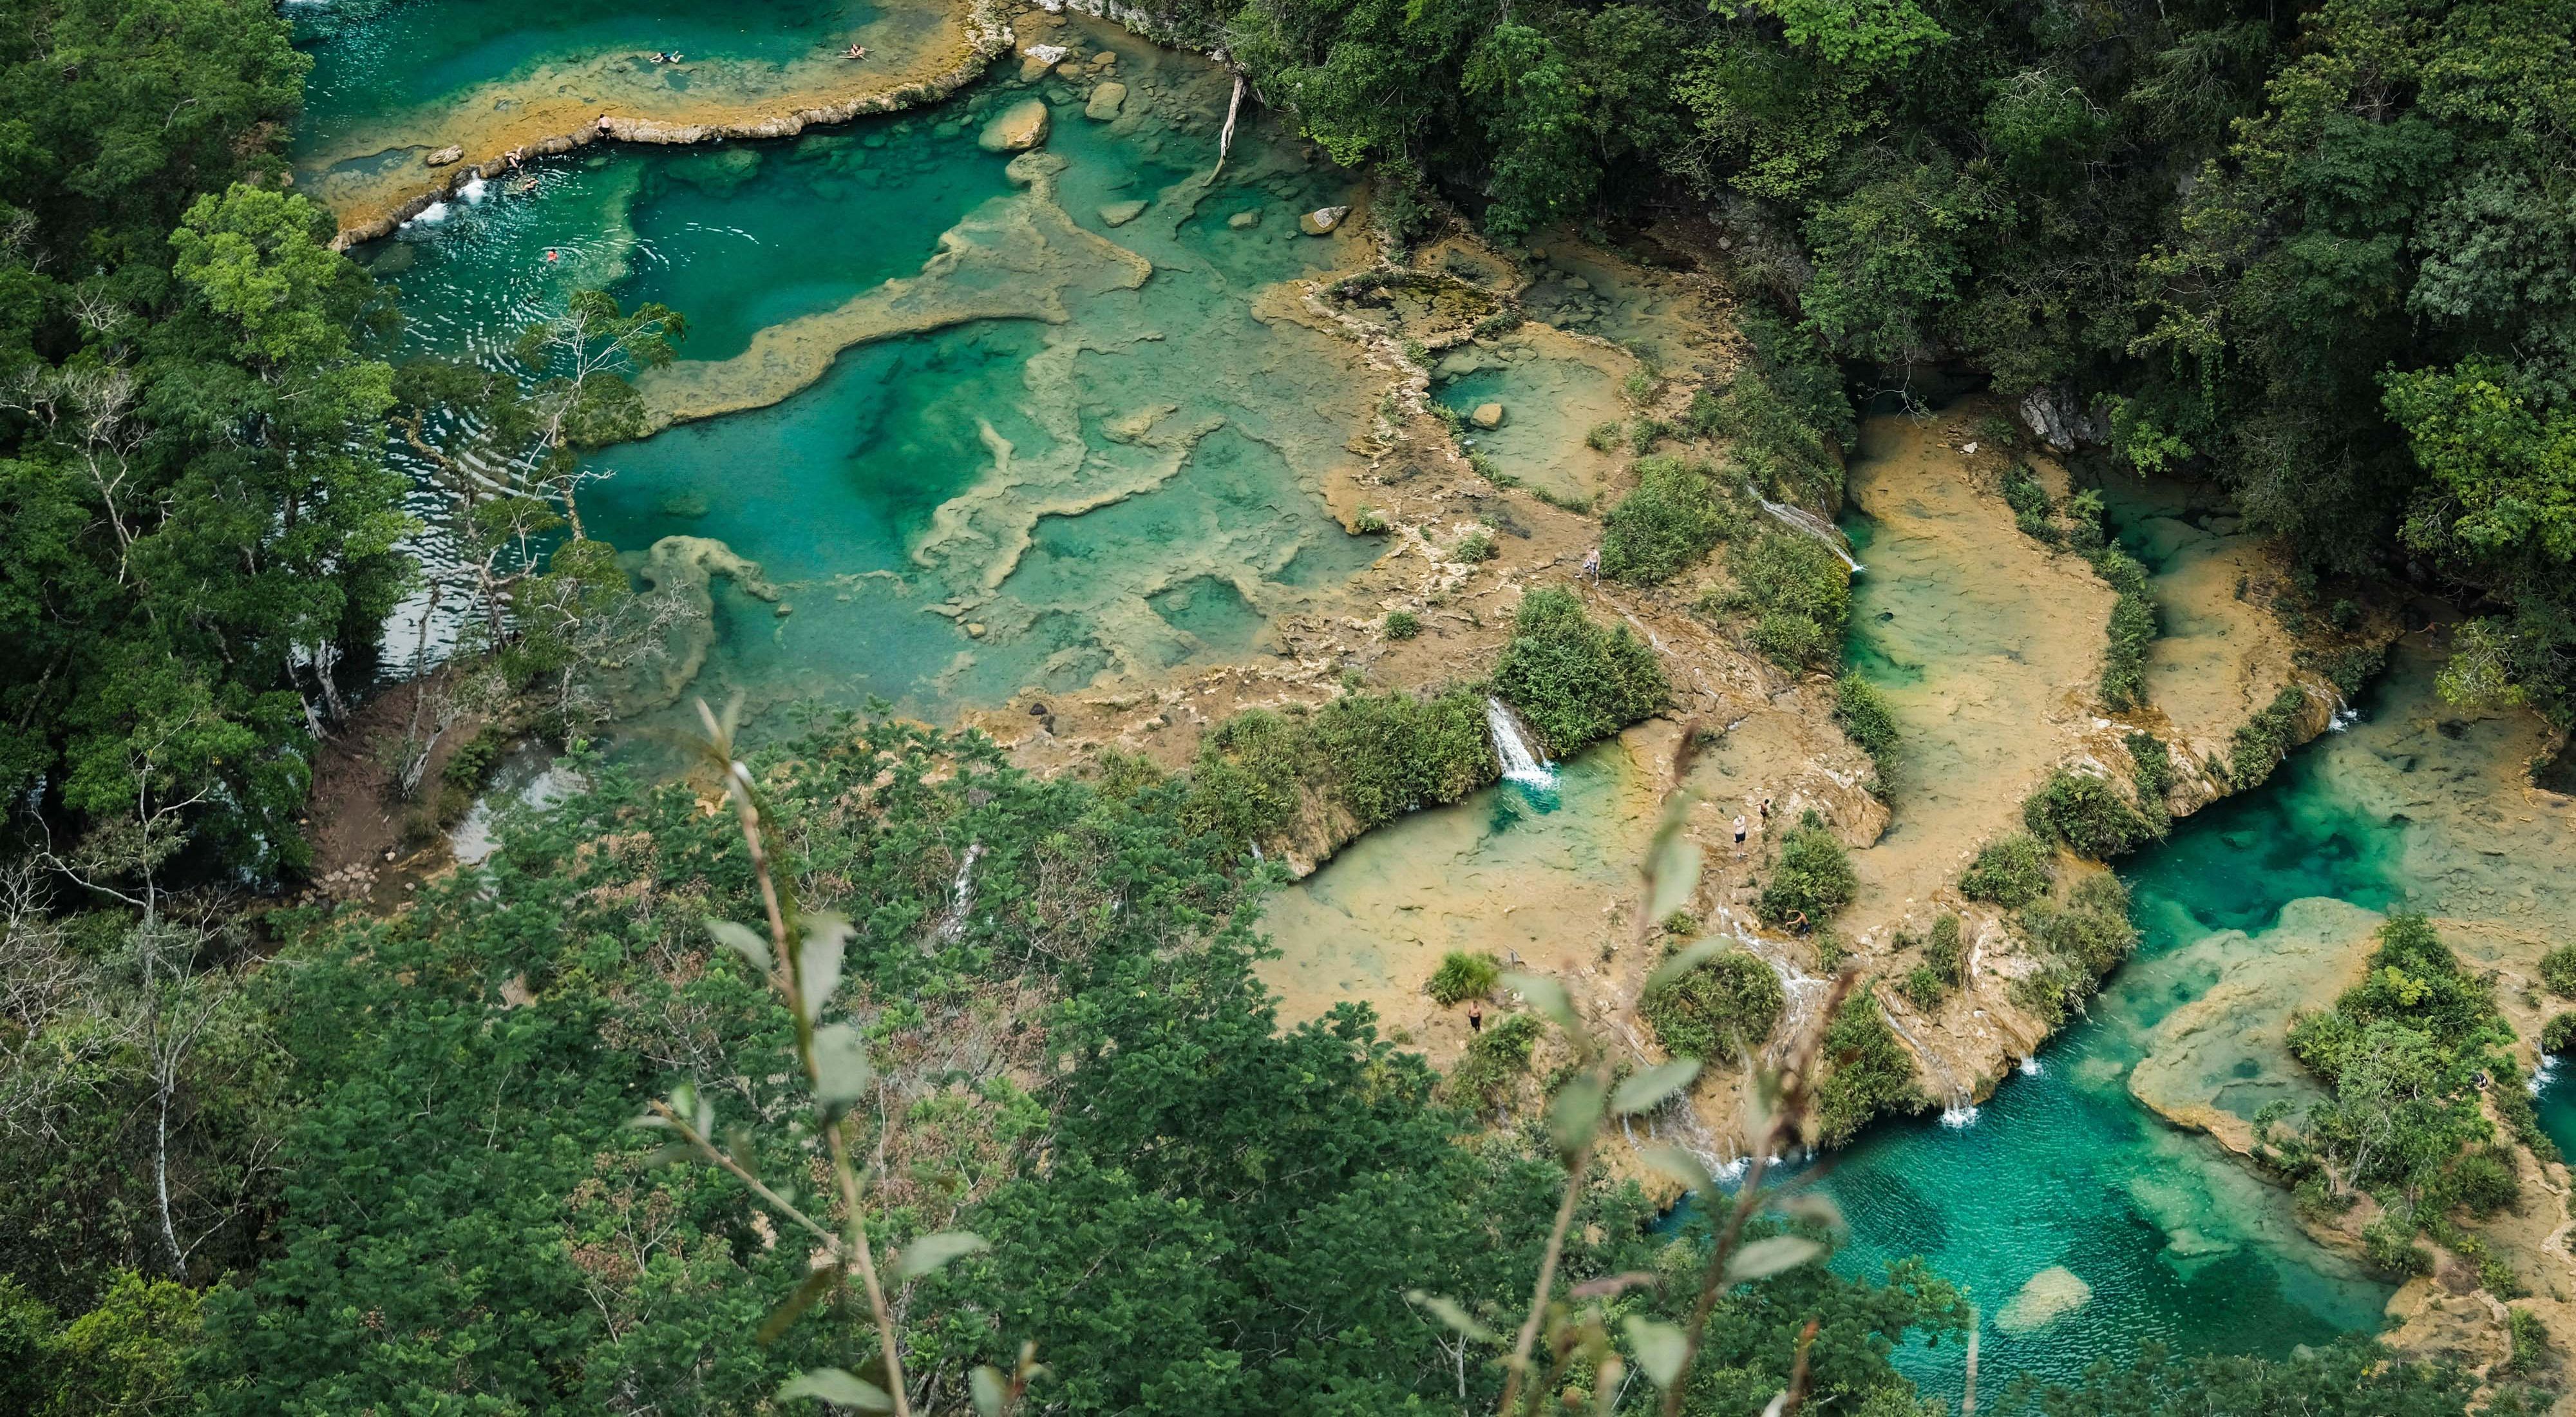 The natural pools of Semuc Champey in Guatemala are perhaps one of the most impressive natural wonders on the planet.